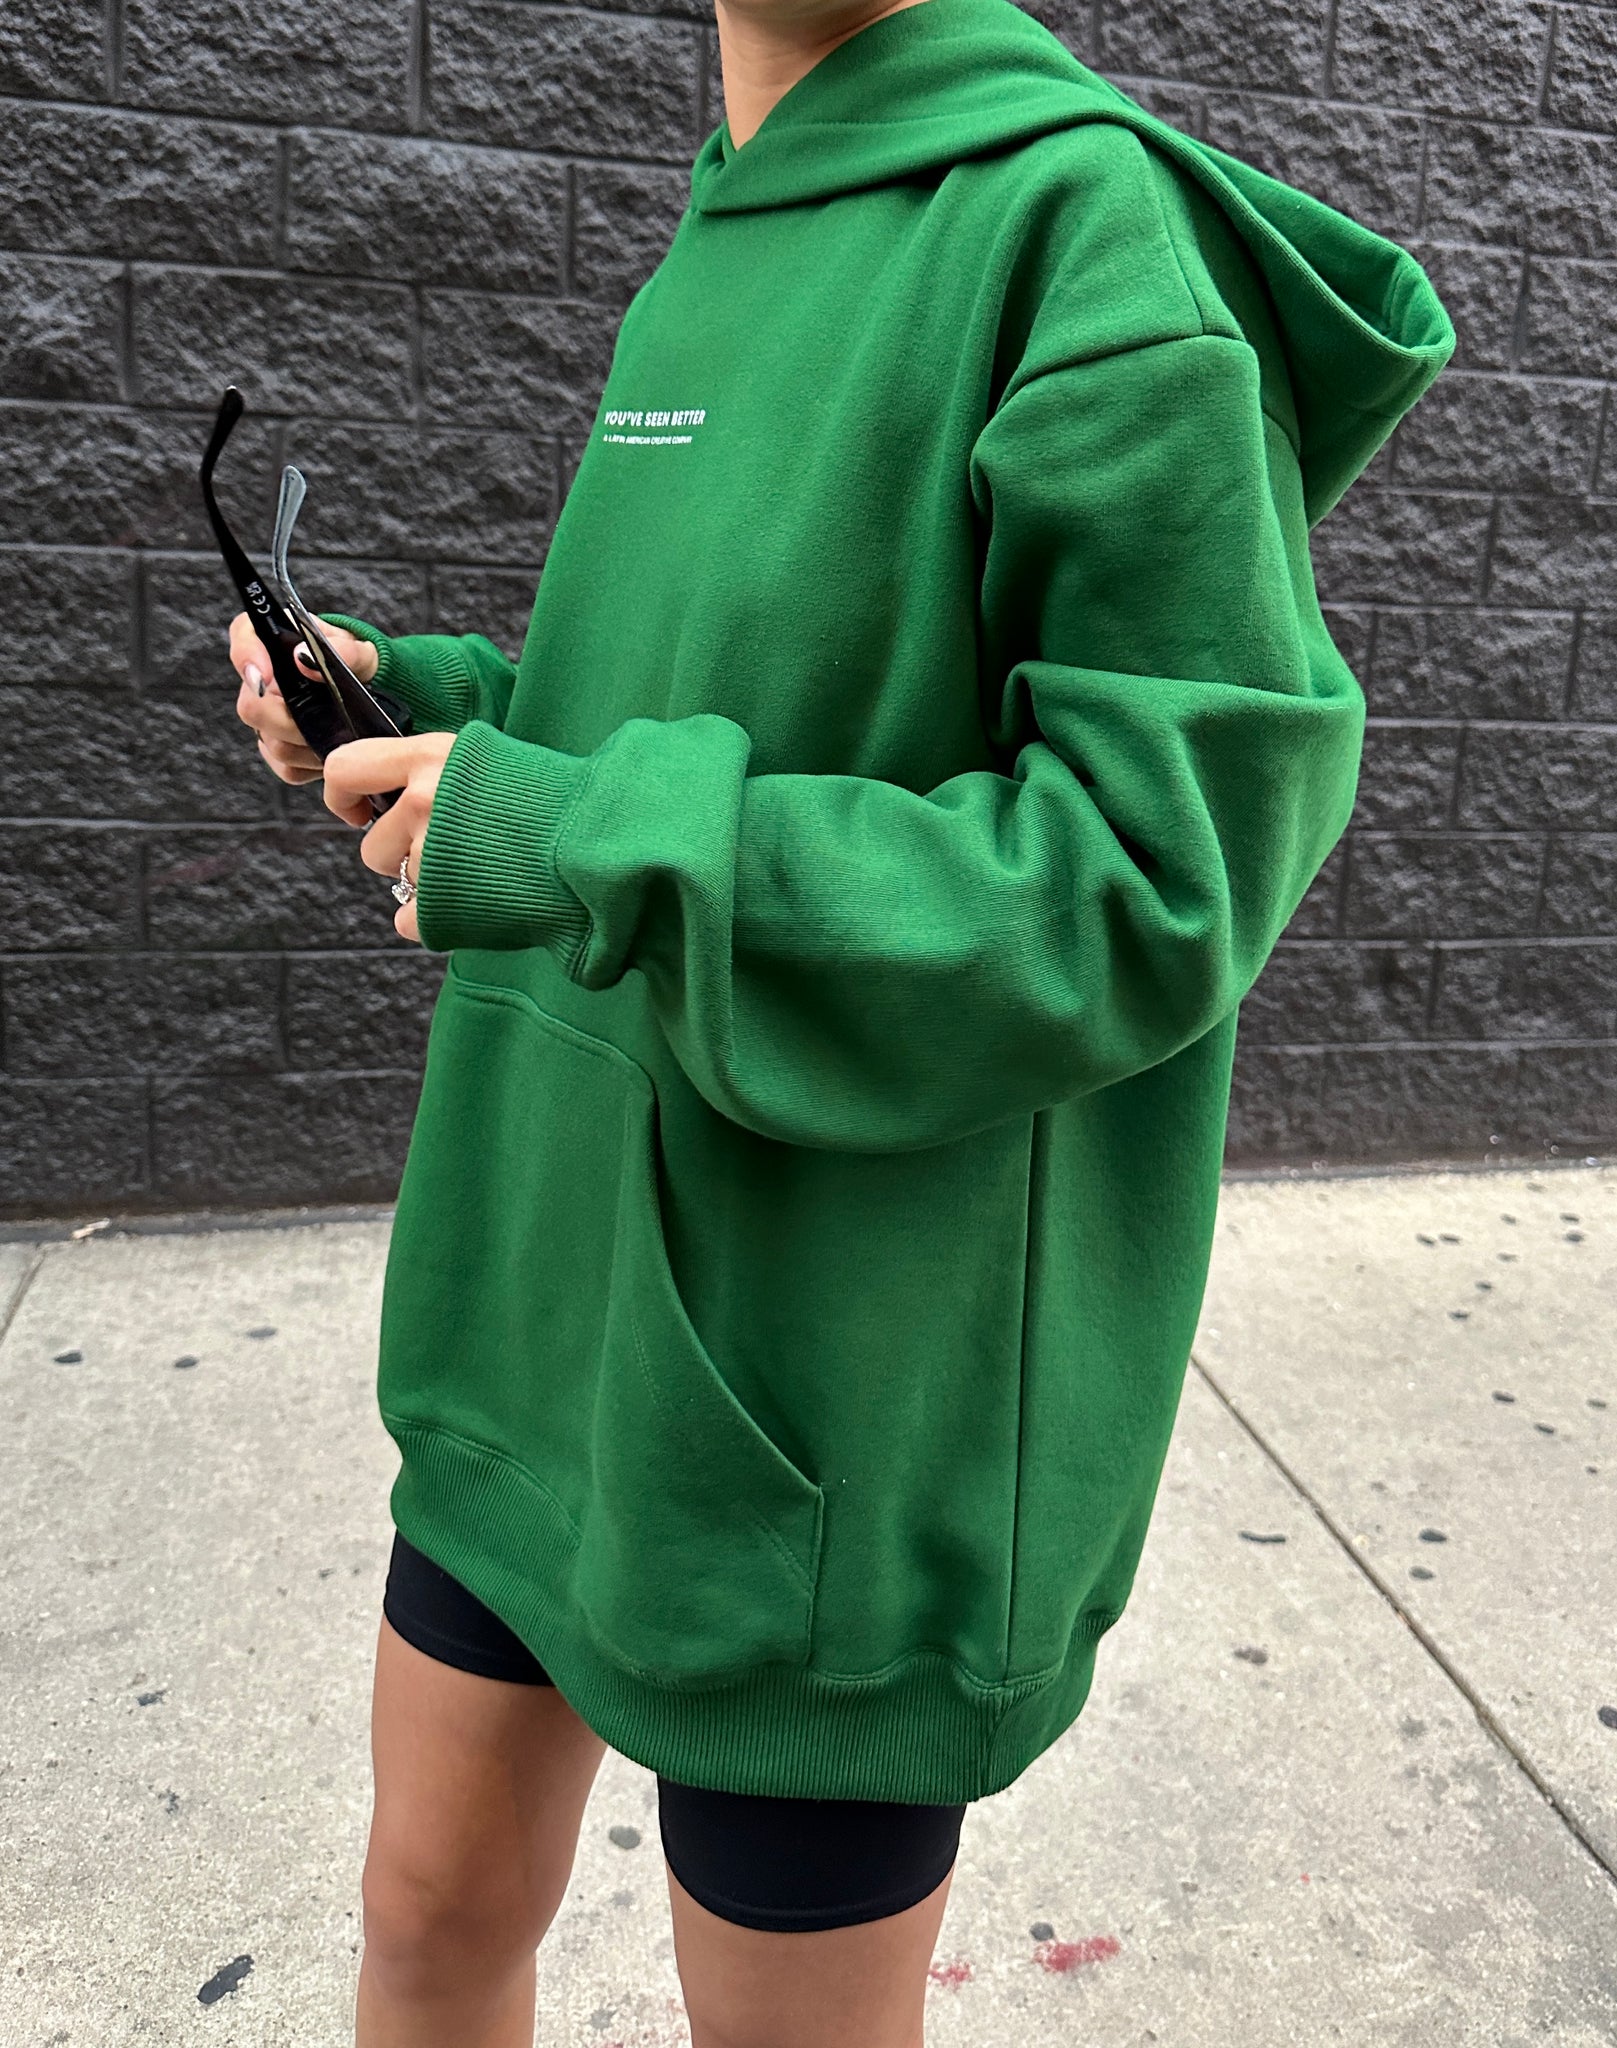 Made in Latin America Green Oversized Hoodie